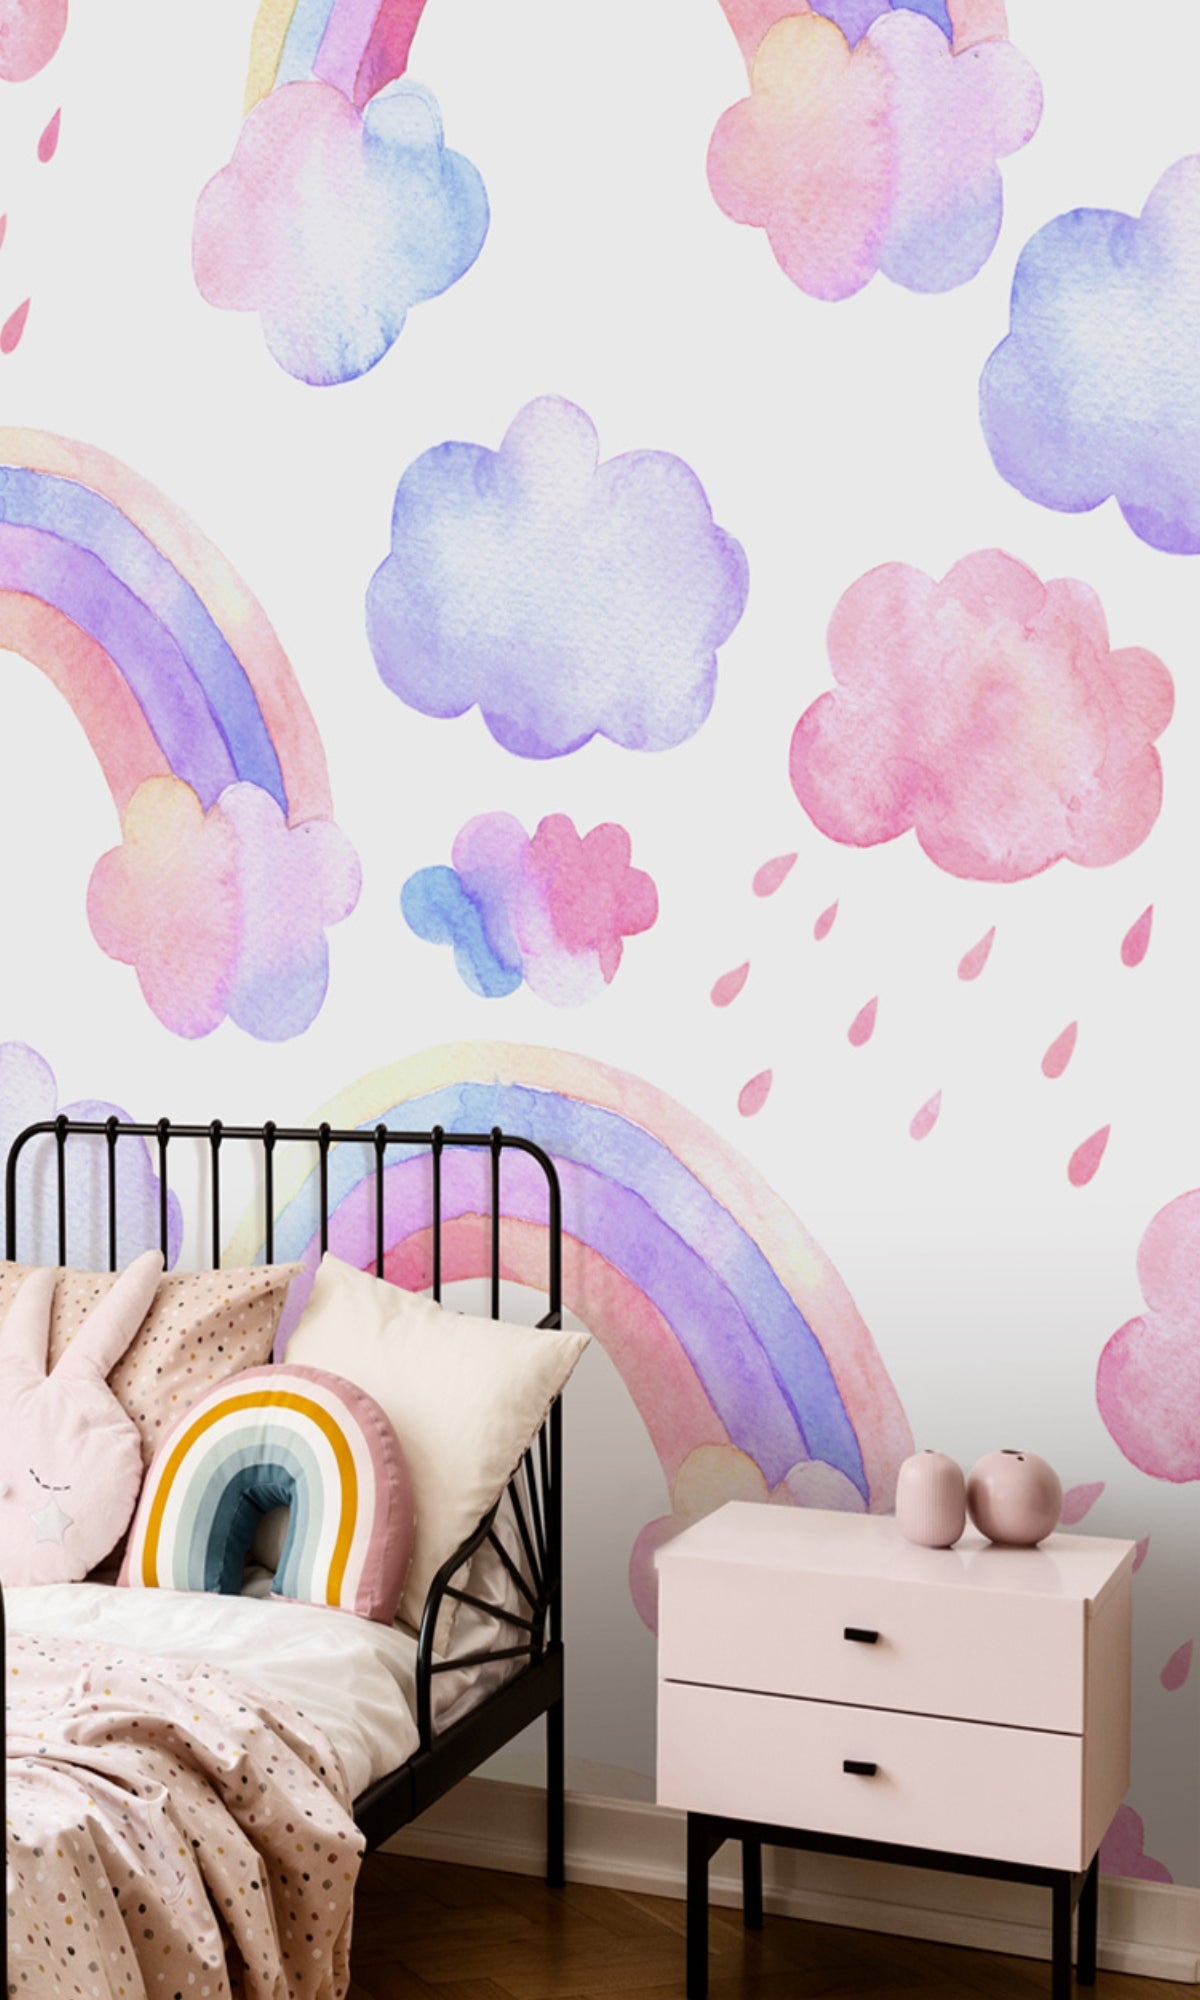 Colorful Rainbow and Clouds Mural Wallpaper M1469-Sample